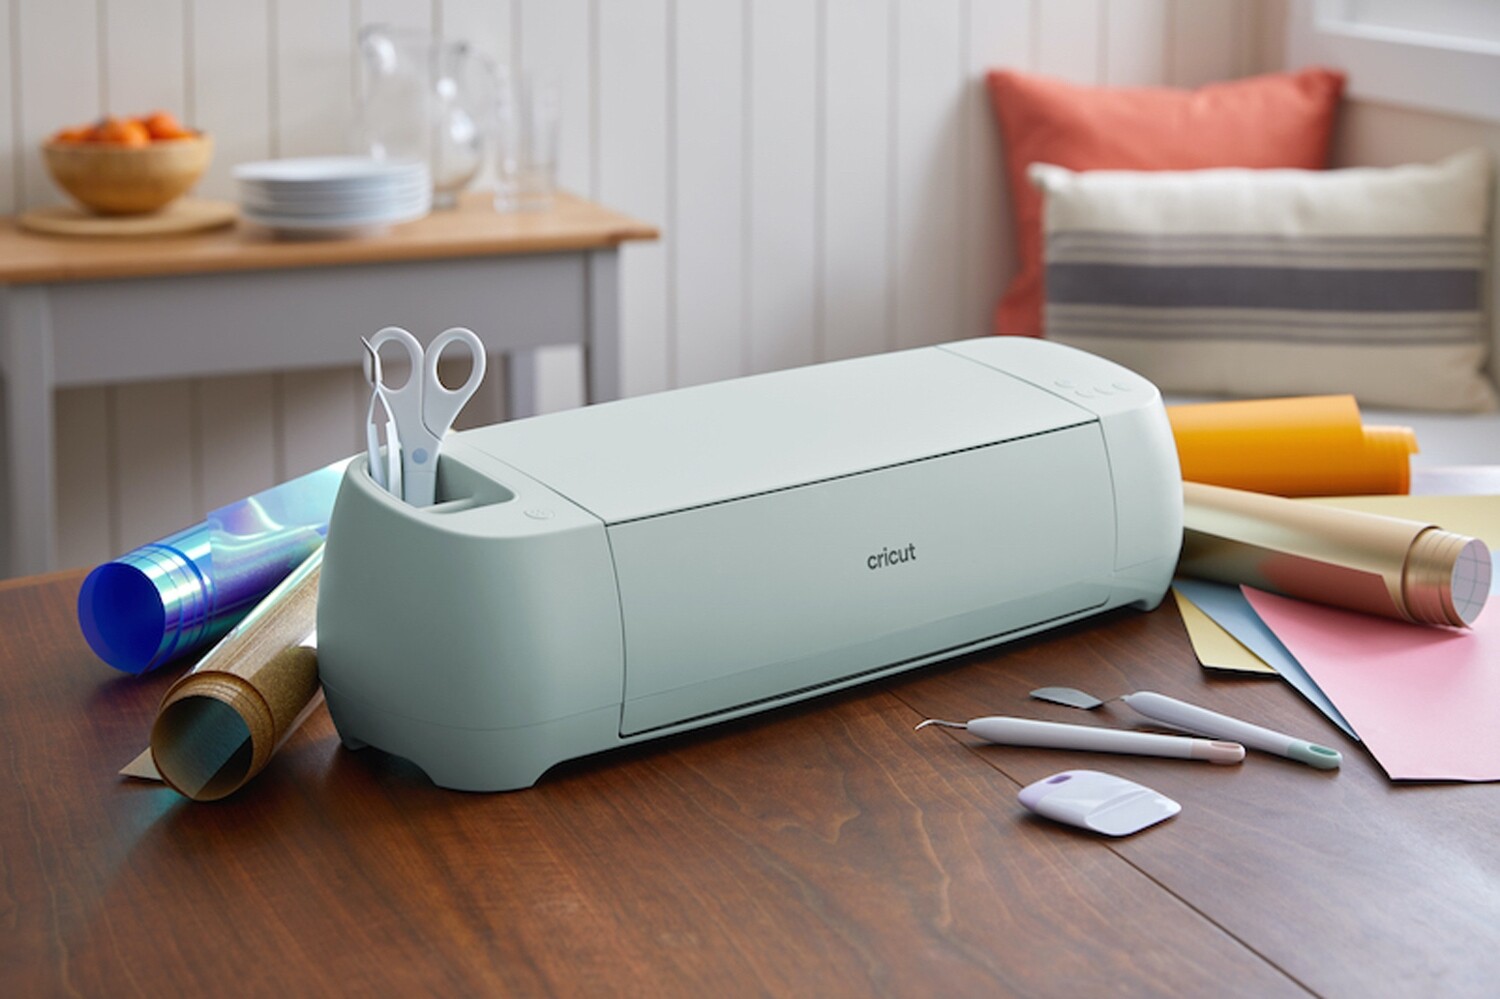 Cricut for Intermediate Makers! Wednesday 17 August, 12.30-2.30pm